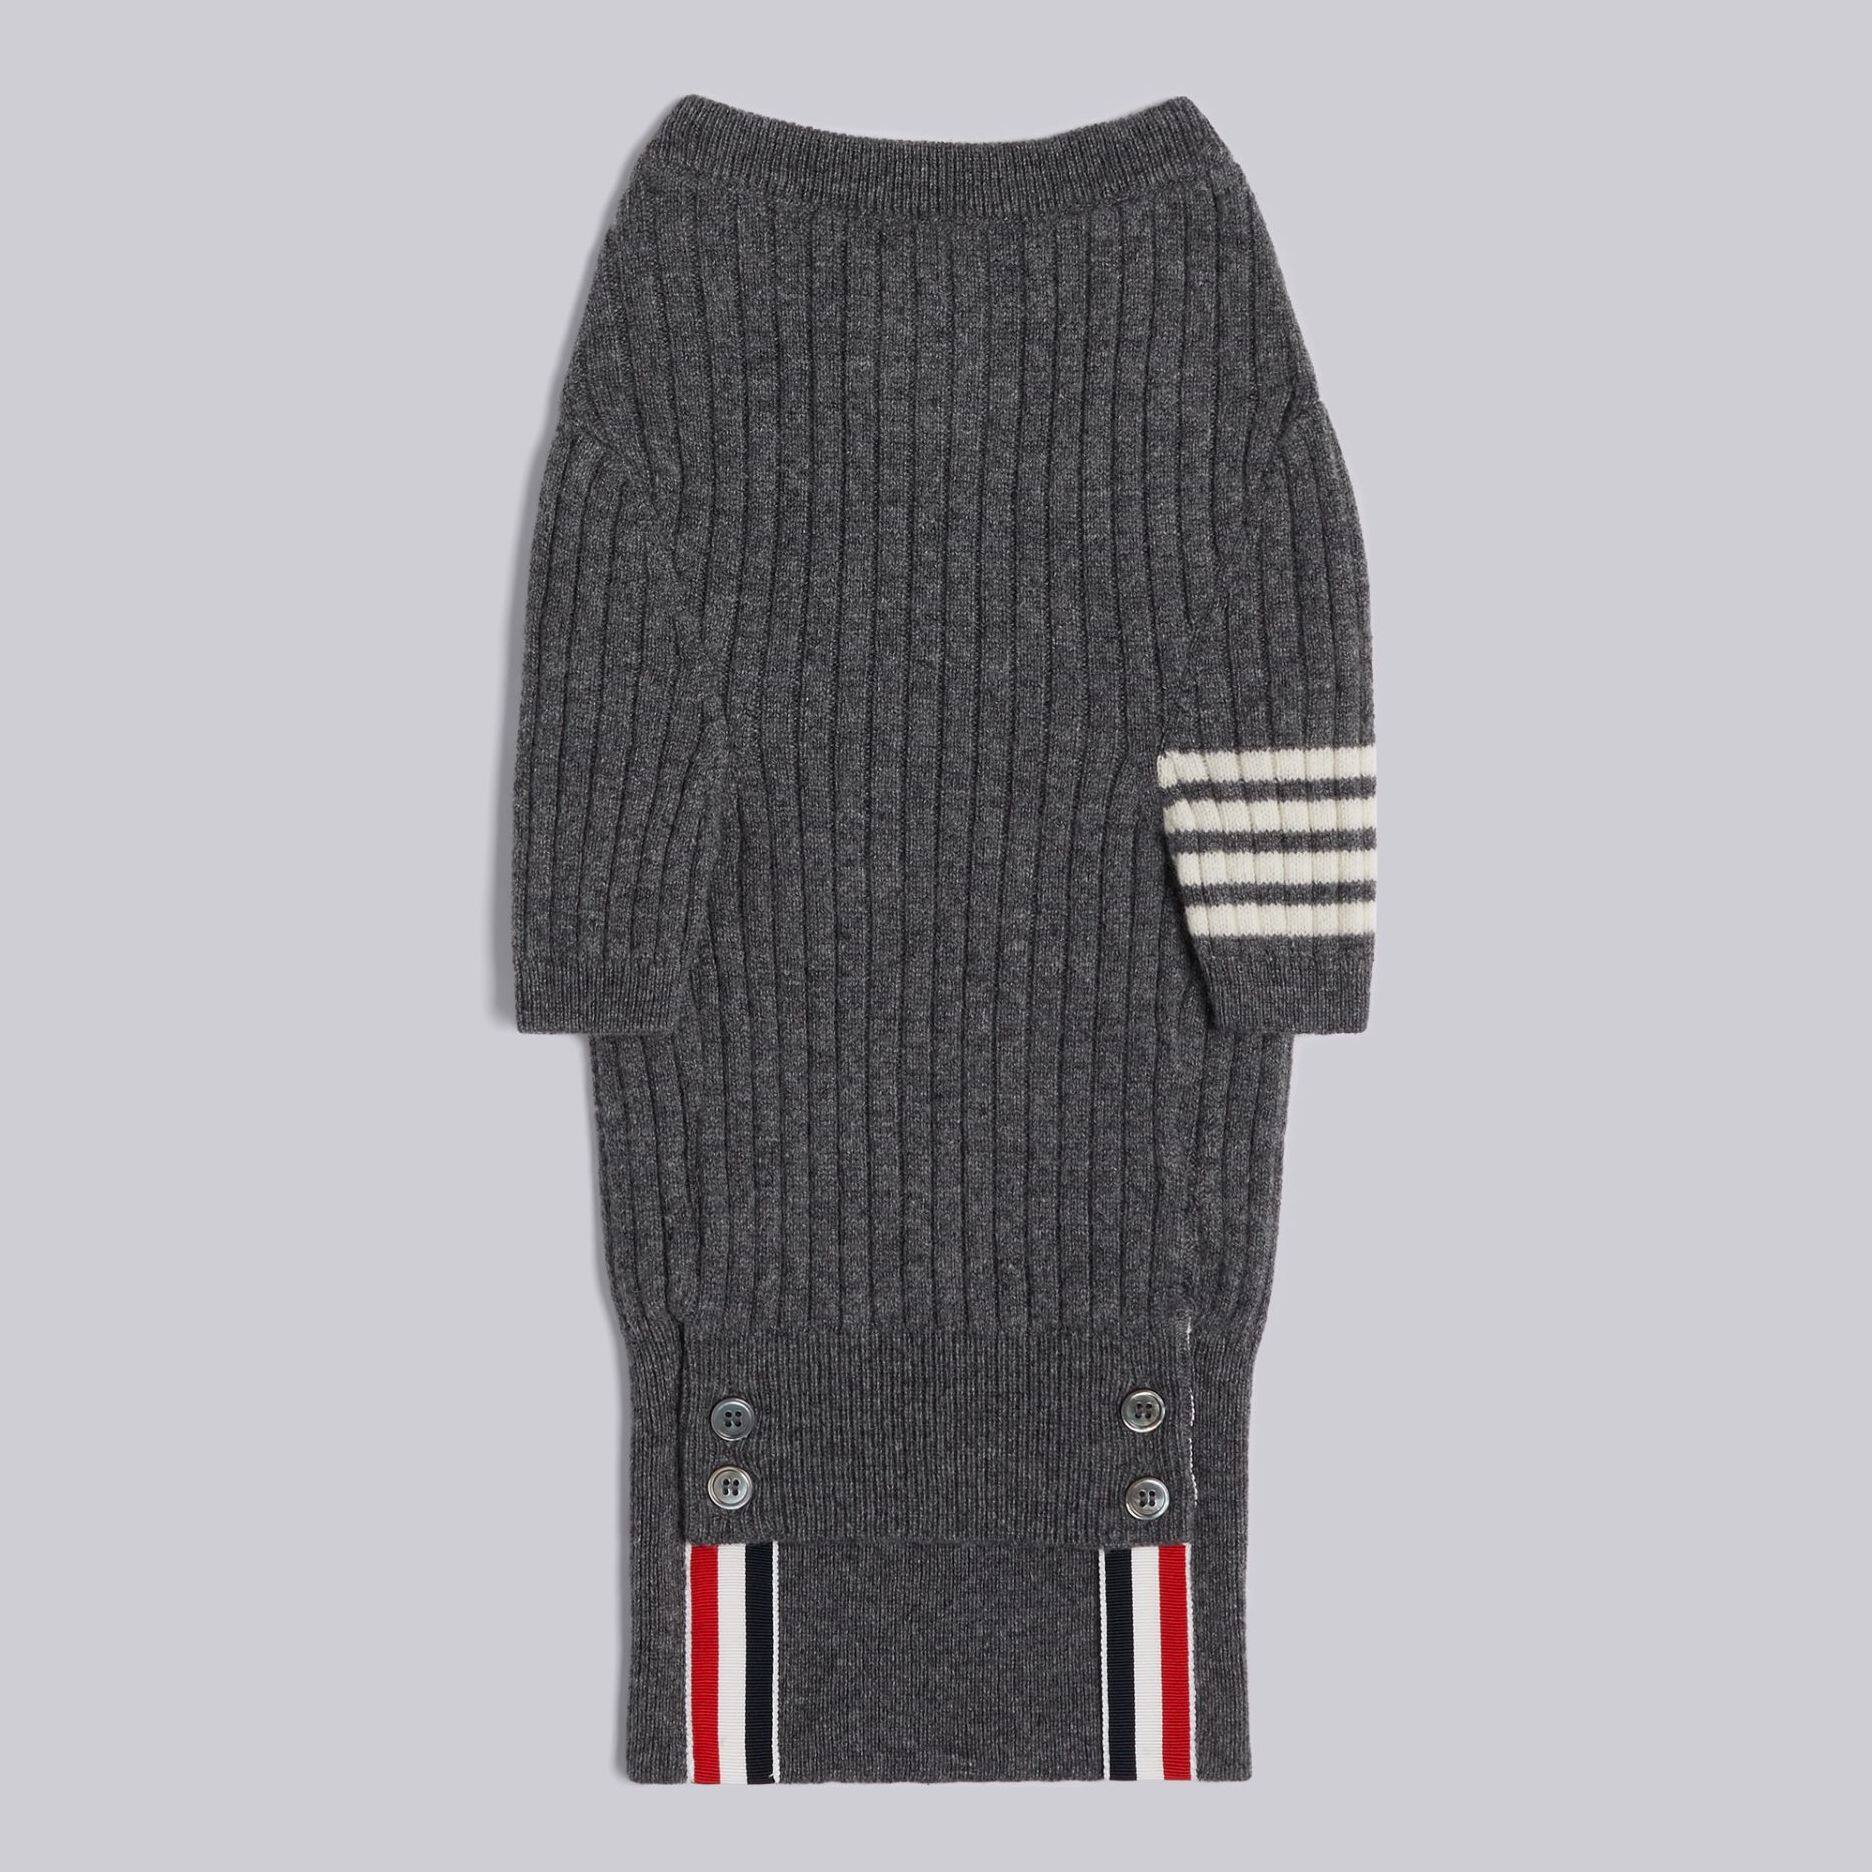 THOM BROWNE Hector Browne Canine Crewneck Pullover